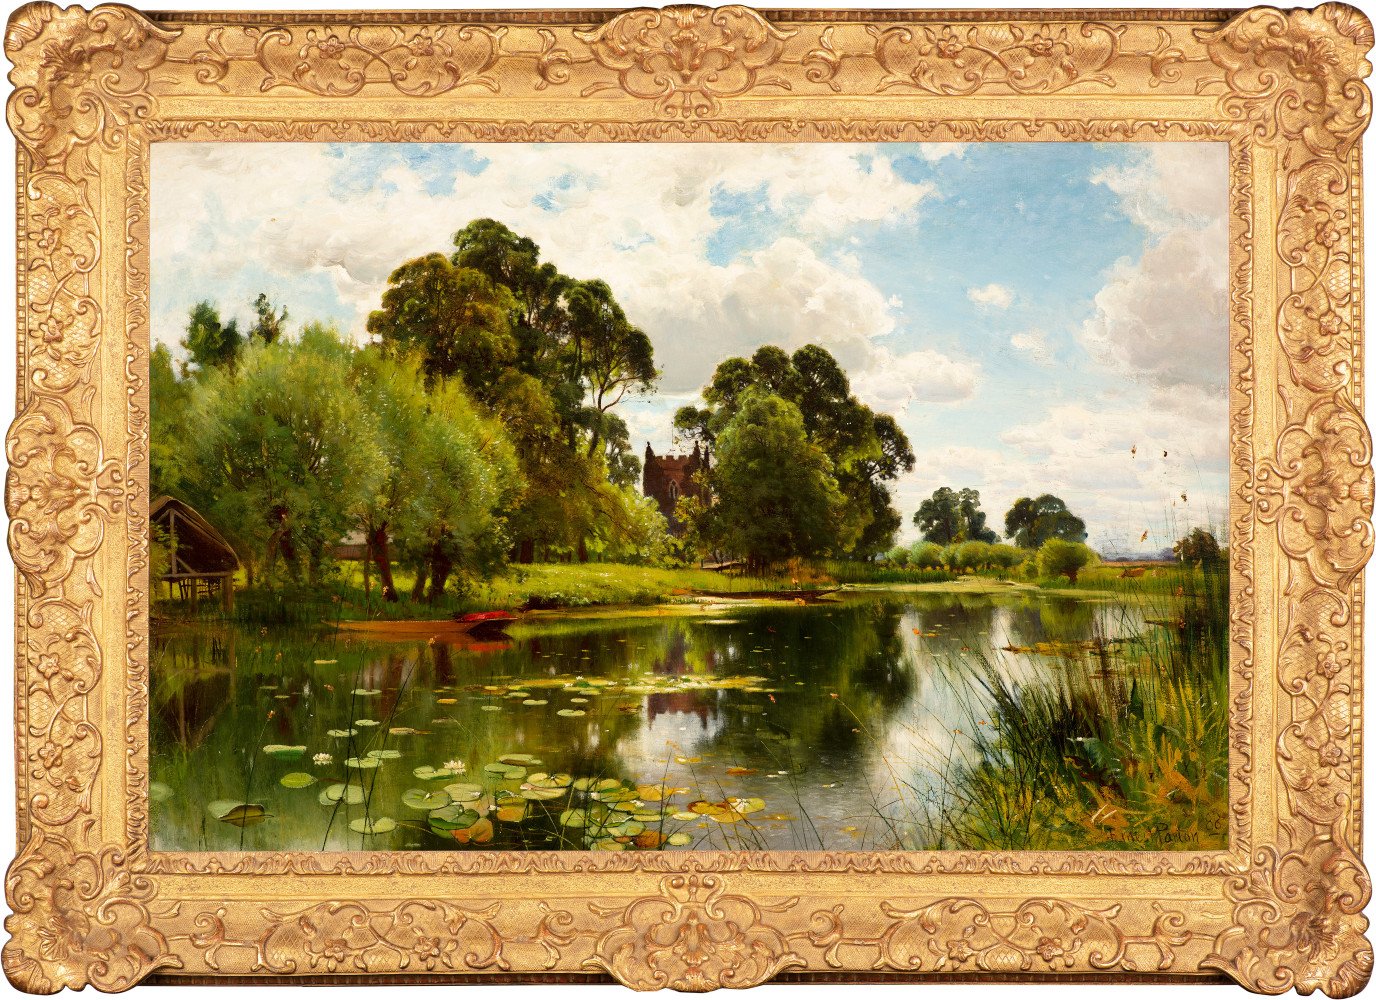 A bucolic view of the Thames River with lily pads, rowboats, and a church in the distance by Ernest Parton (1845–1933), oil on canvas, 24 x 36 in., signed and dated 1888